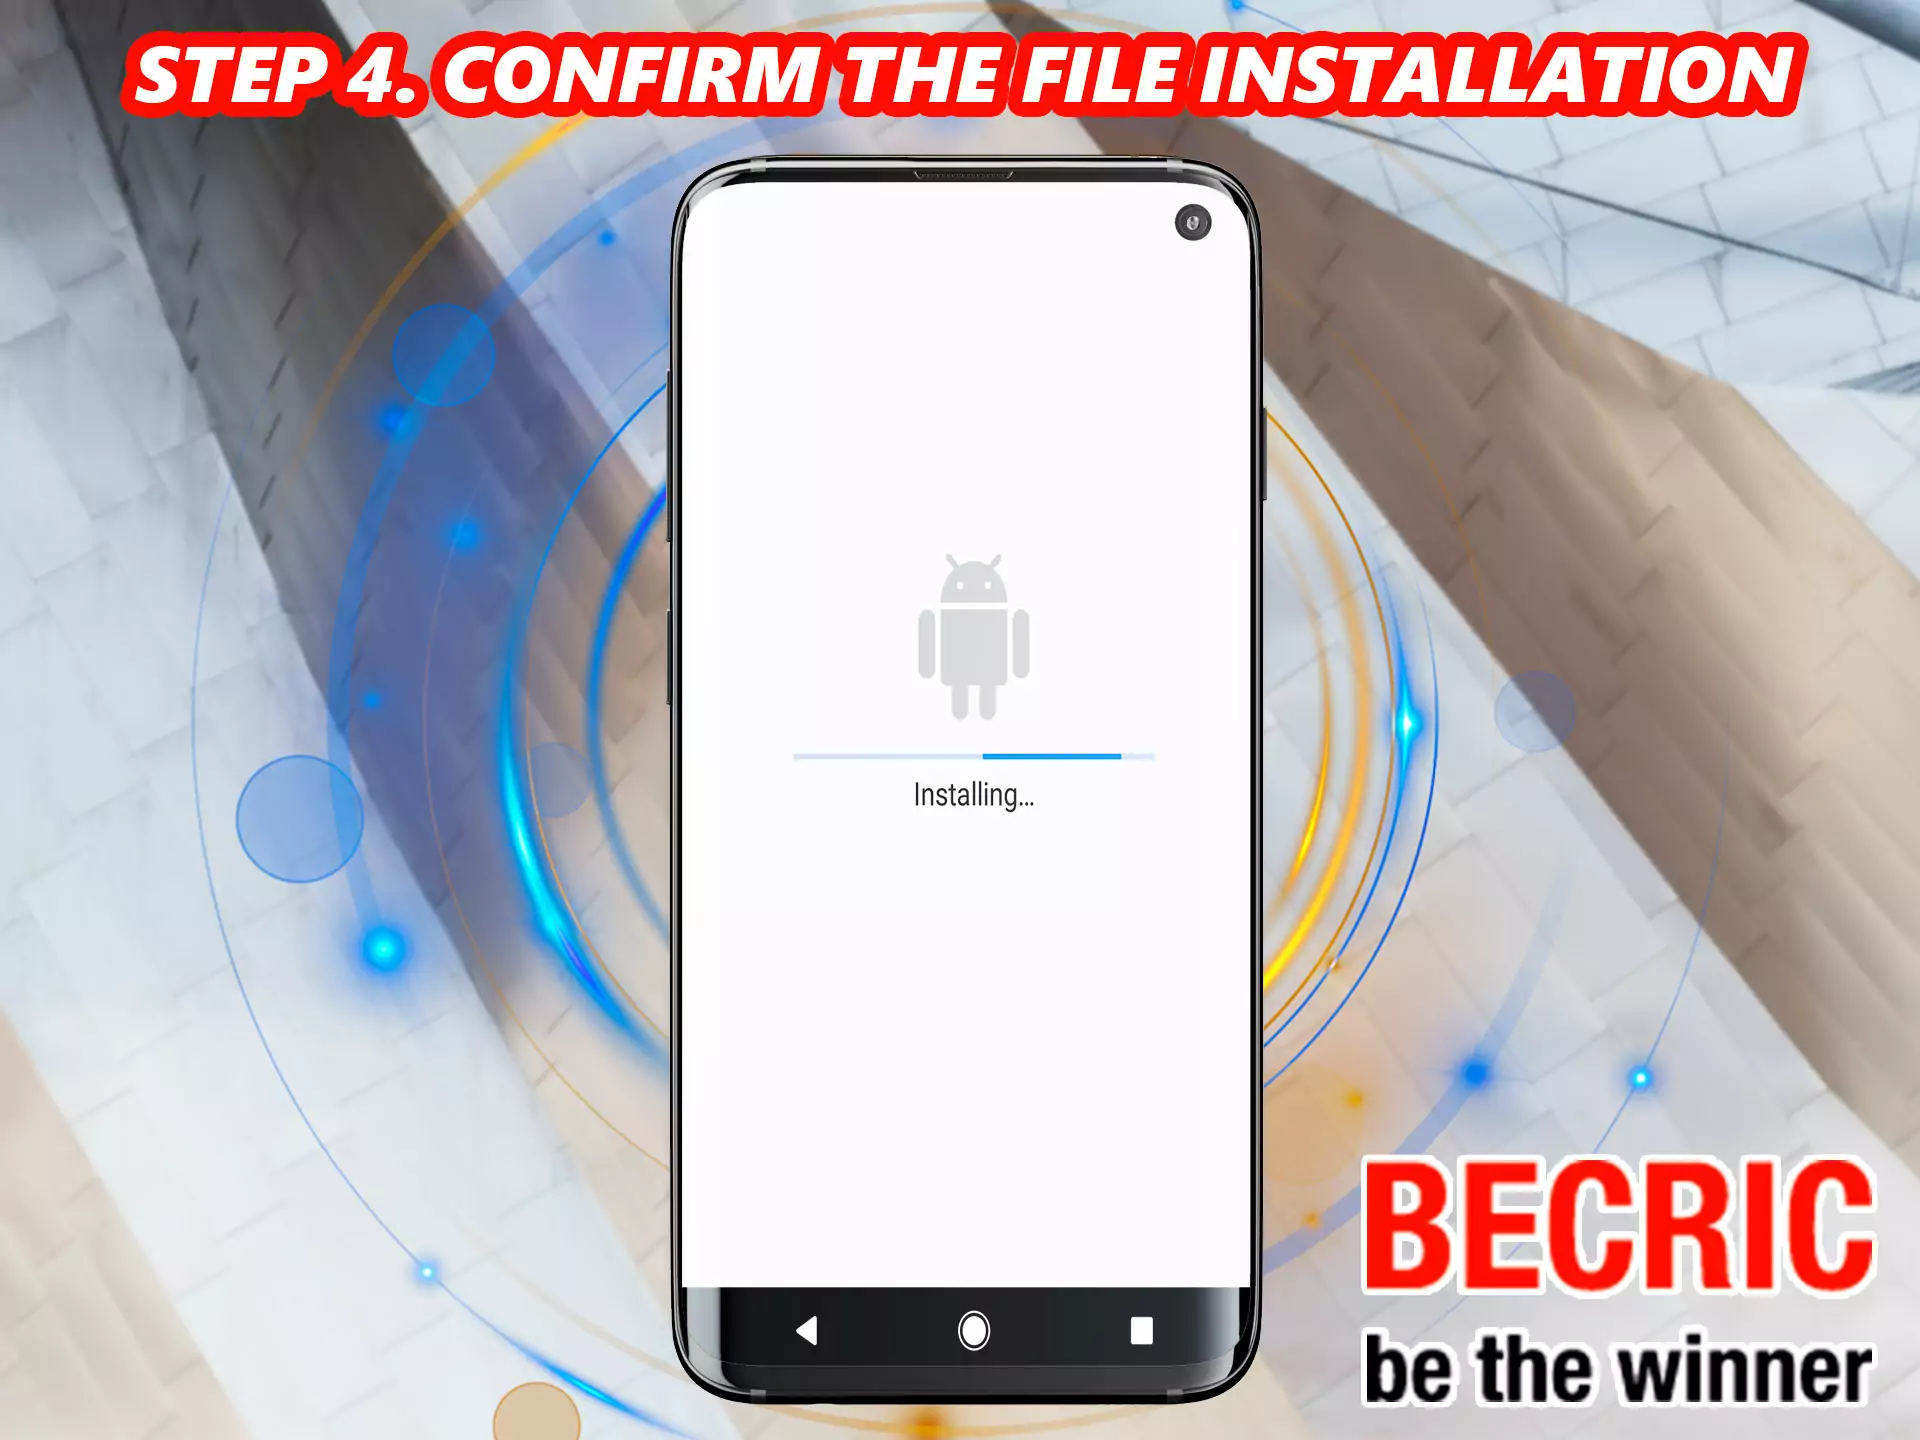 Find the file: BeCric.apk, run the application installation, and enjoy betting on your smartphone.